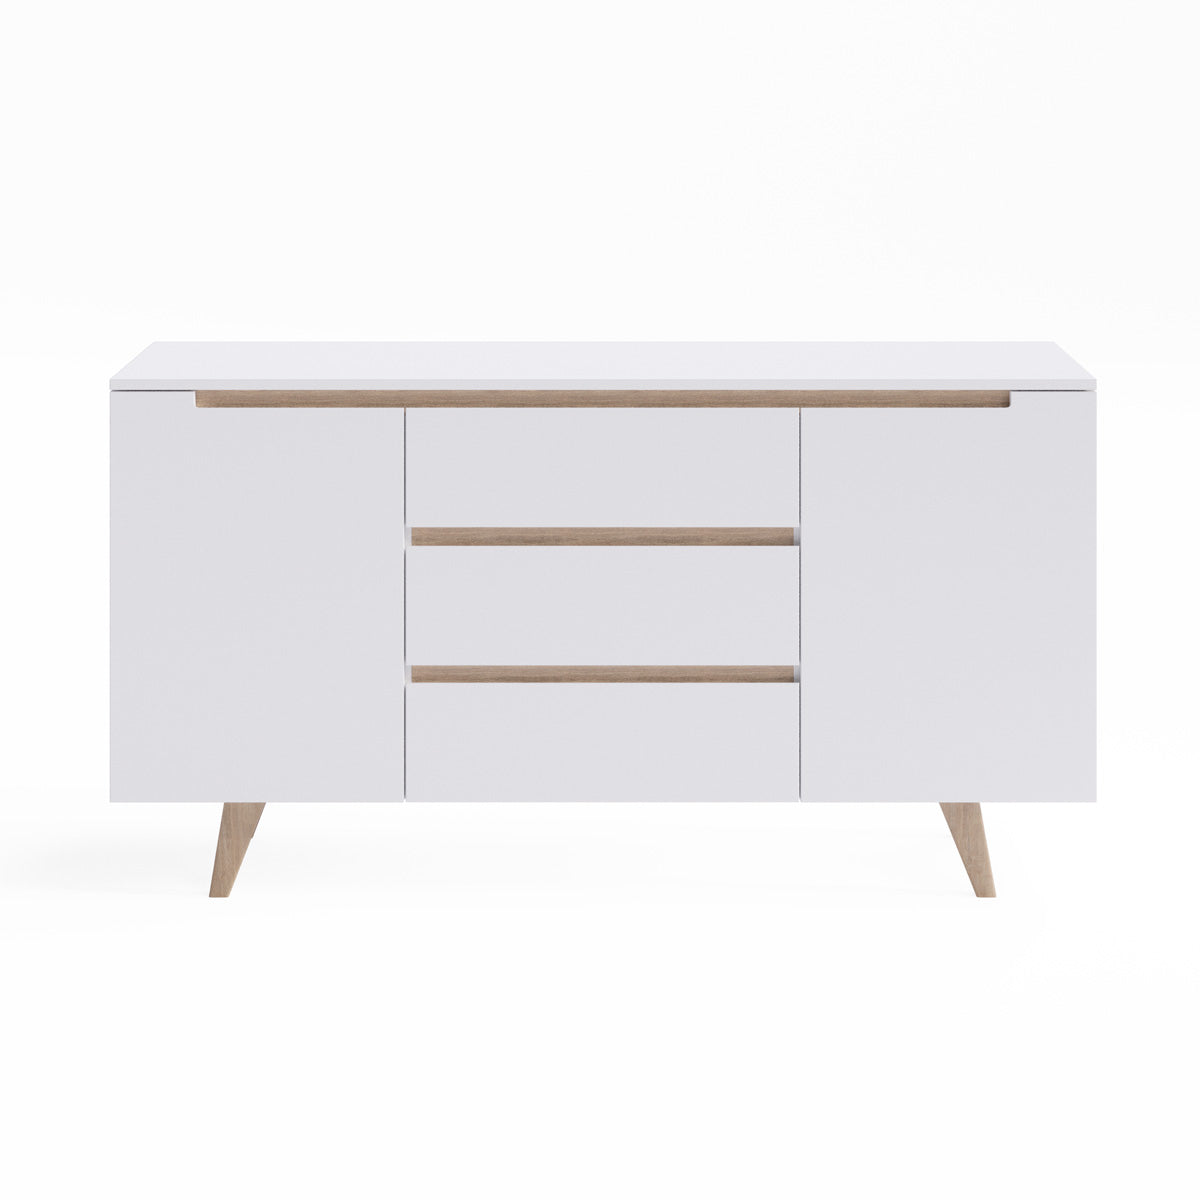 Sideboard Buffet Unit with Solid Oak Legs (Olsen Collection)